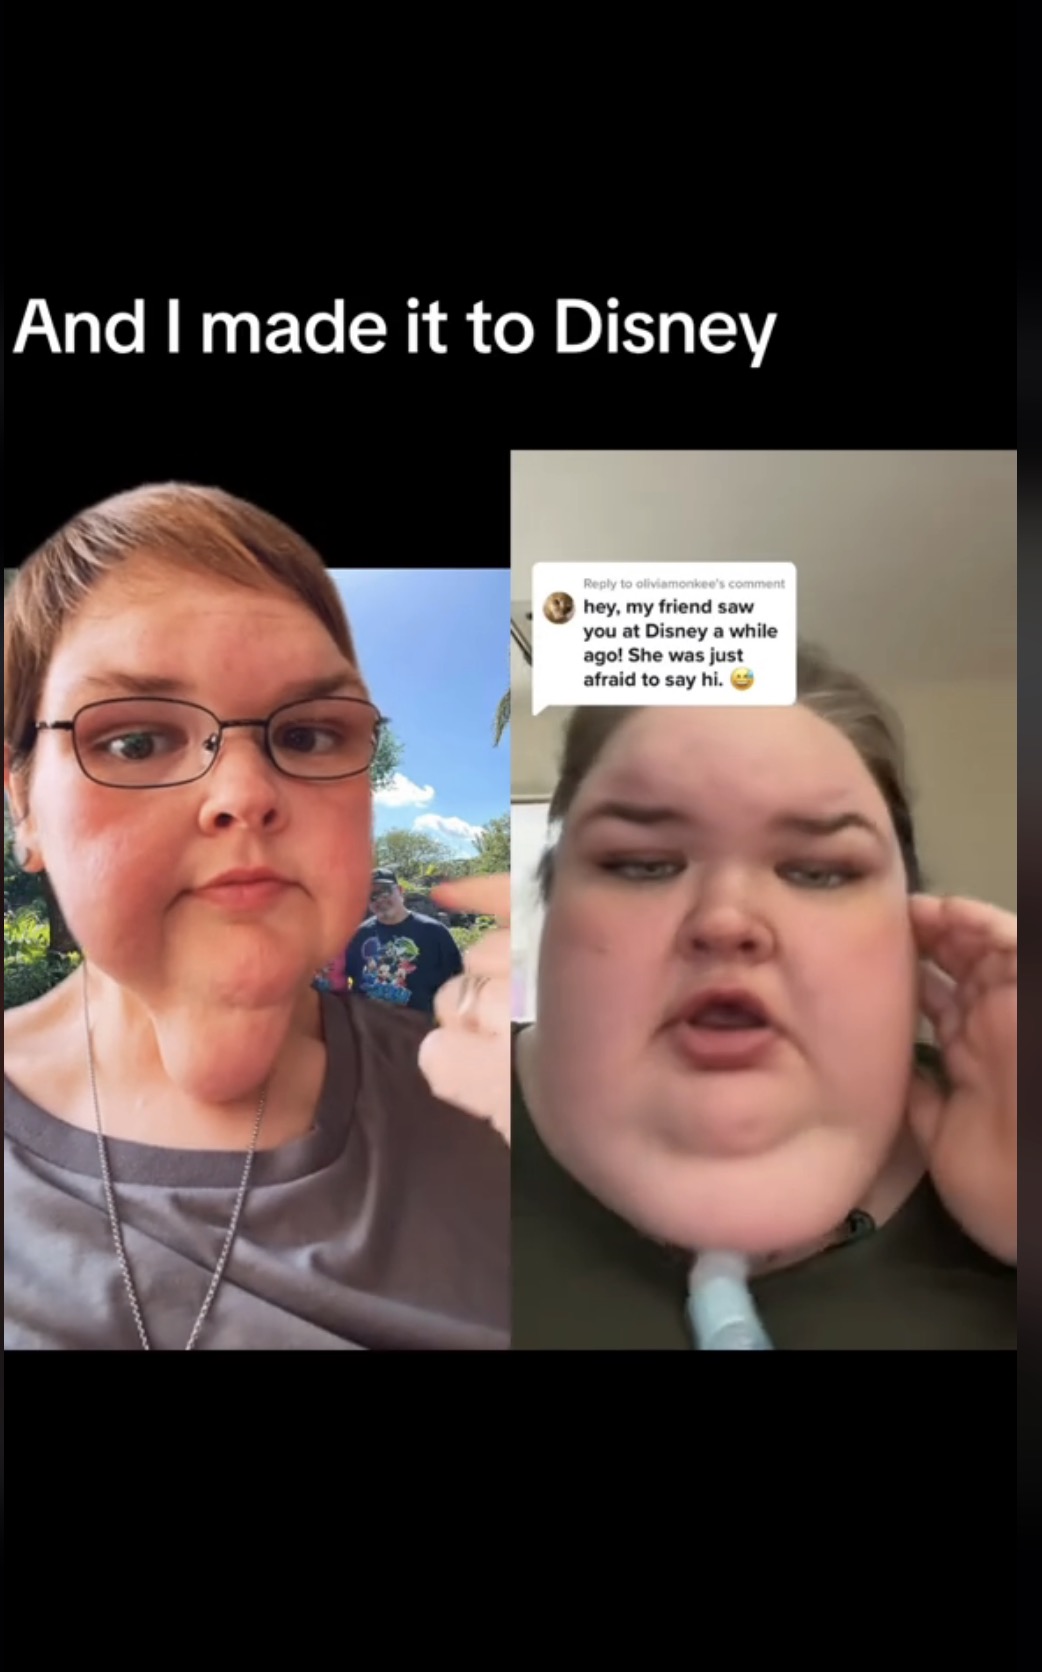 Tammy recently revealed she took a trip to Disney World, which she hadn't been able to do because of her weight